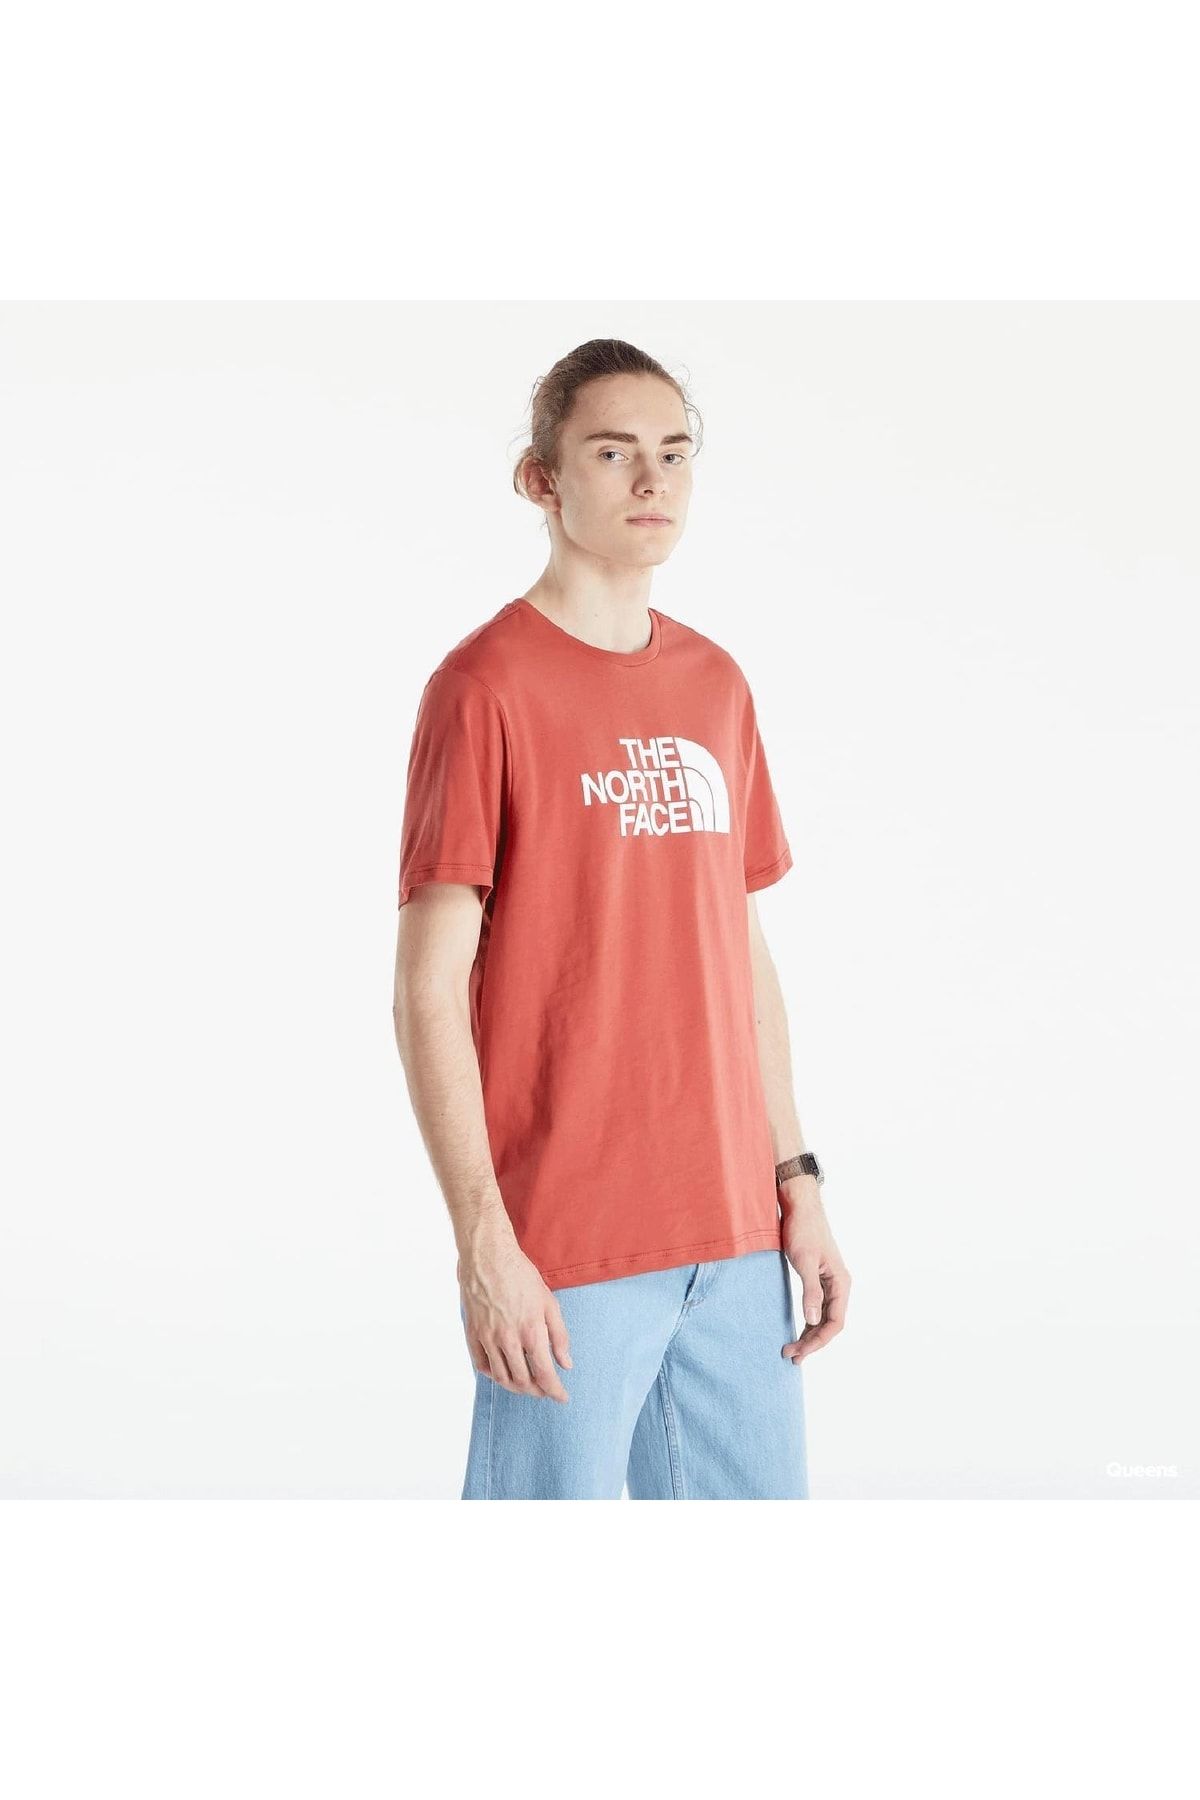 The North Face M S/s Easy Tee - Eu - Nf0a2tx3ubr1